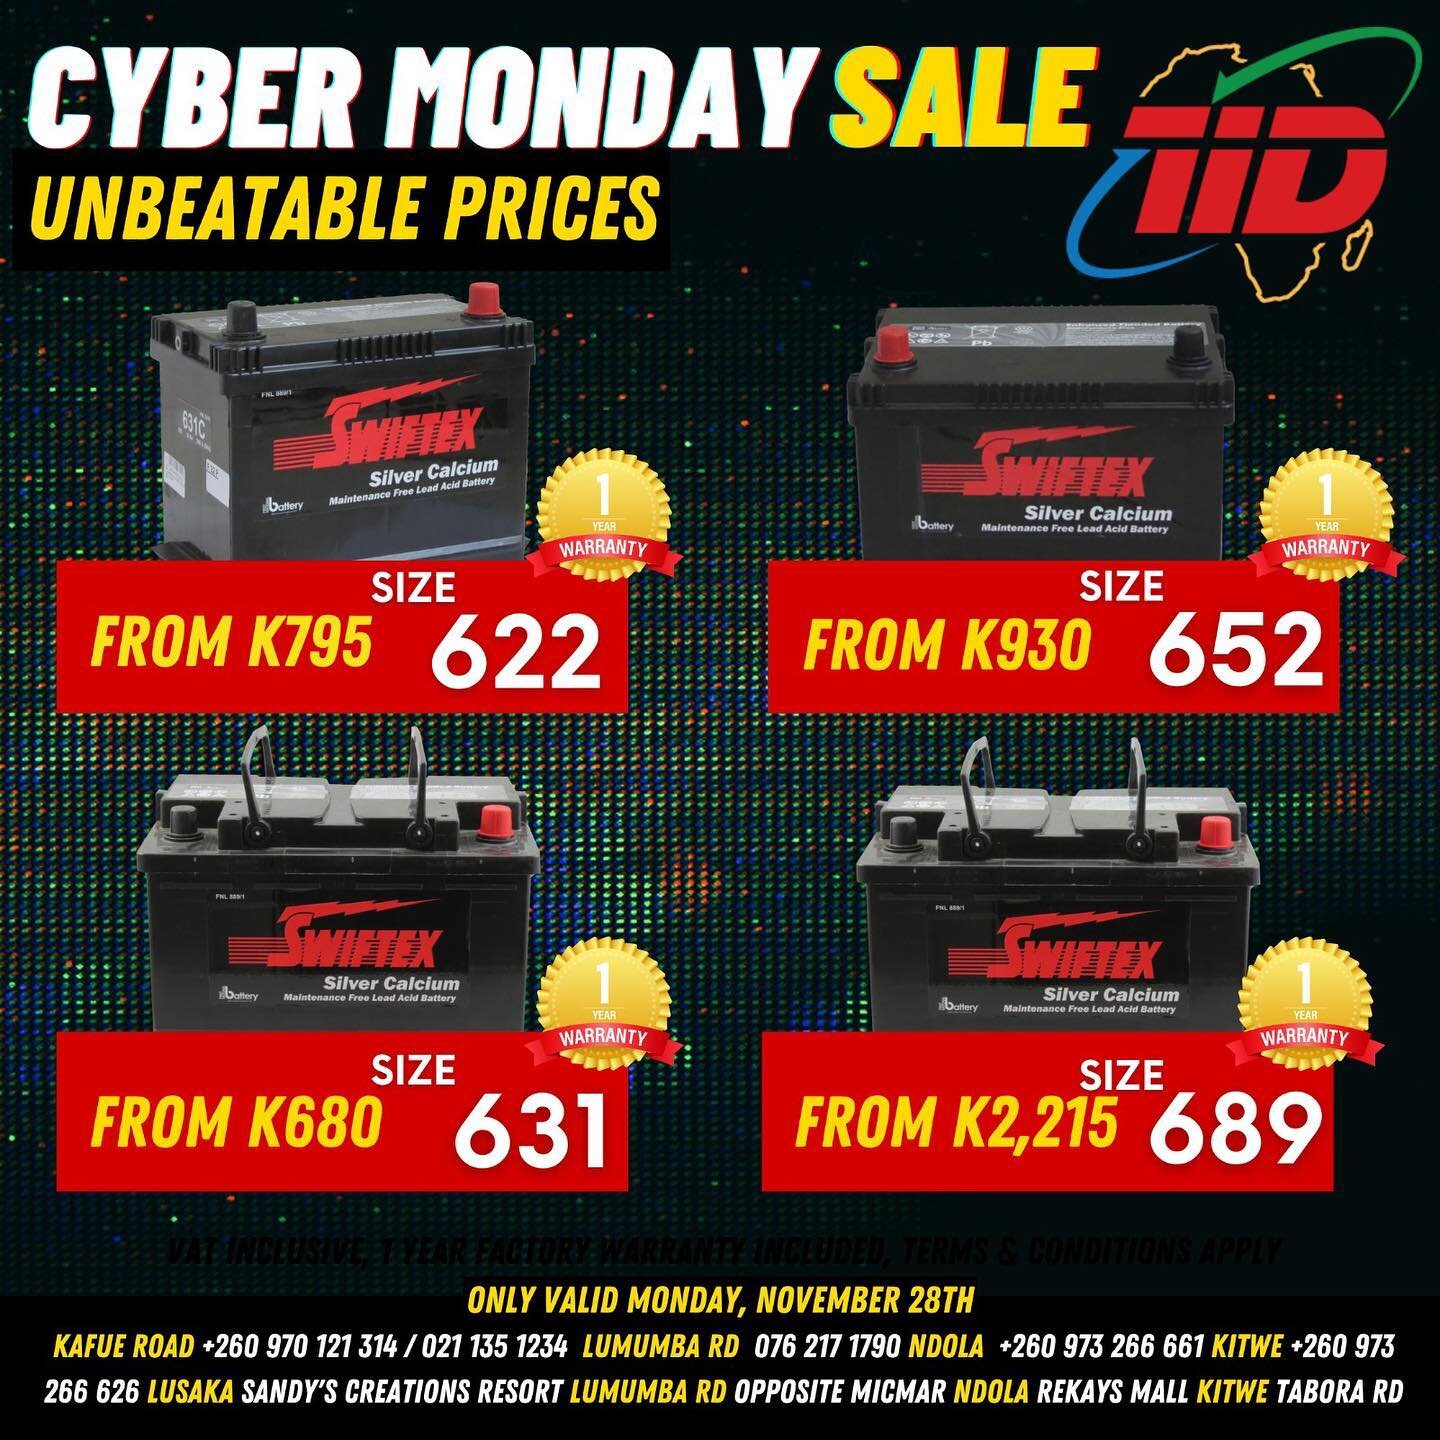 Black Friday Continues! Don&rsquo;t miss out on our CYBER MONDAY SALE! Valid ONLY TODAY MONDAY 28th! Hurry while stocks last, UNBEATABLE prices. 

Kafue Road/Sandy&rsquo;s Creations Resort +260970121314 / +260211351234
Lumumba Road 0762171790
Ndola +